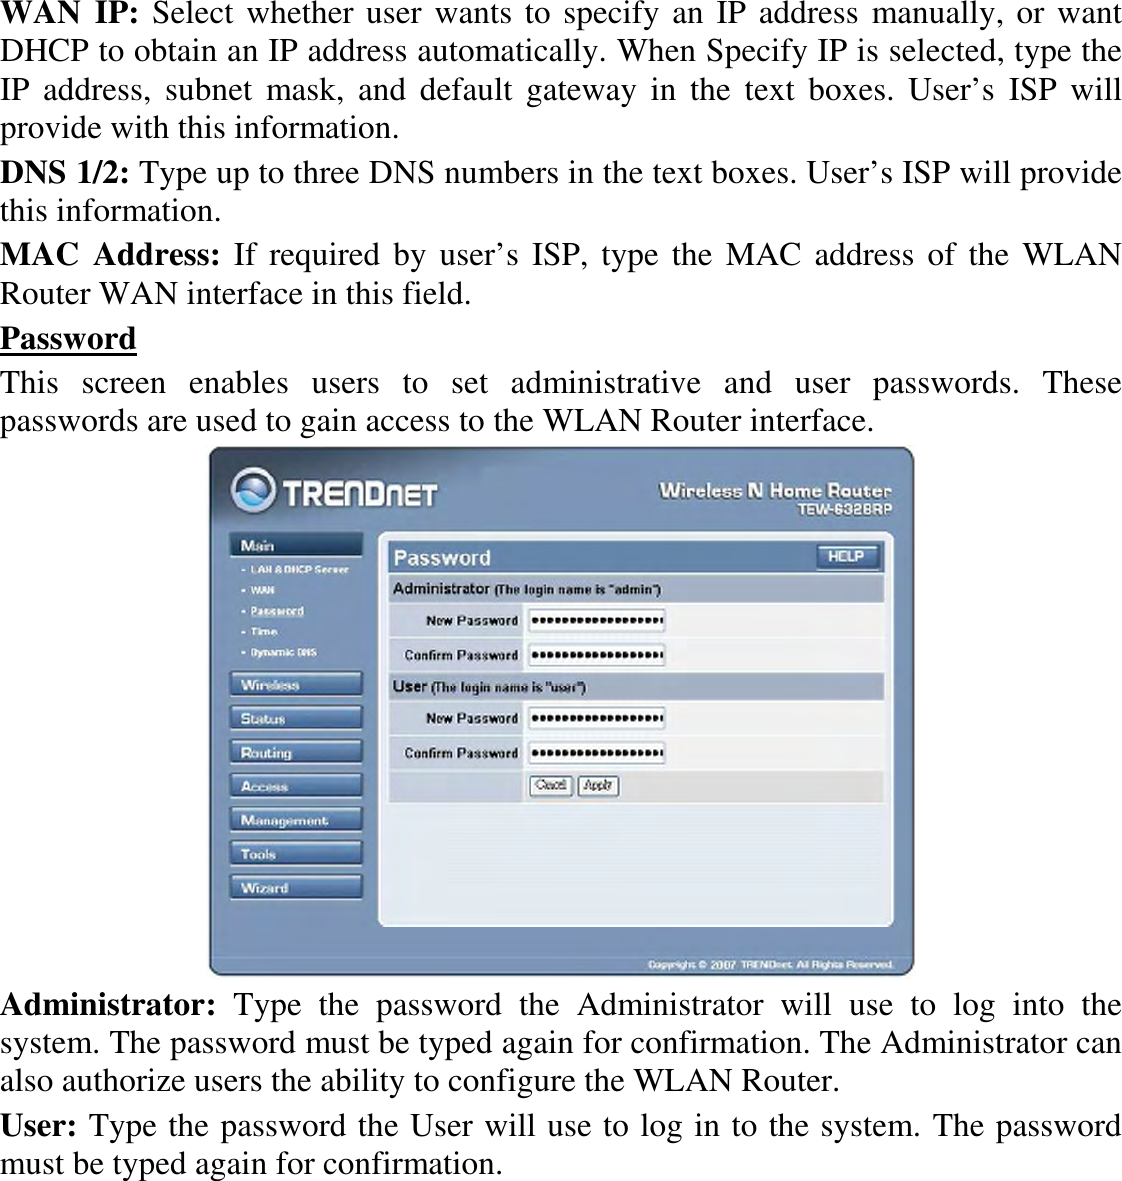 WAN IP: Select whether user wants to specify an IP address manually, or want DHCP to obtain an IP address automatically. When Specify IP is selected, type the IP  address,  subnet  mask,  and  default  gateway  in  the  text  boxes.  User’s  ISP  will provide with this information. DNS 1/2: Type up to three DNS numbers in the text boxes. User’s ISP will provide this information. MAC  Address: If required  by user’s ISP, type the  MAC address of  the WLAN Router WAN interface in this field. Password This  screen  enables  users  to  set  administrative  and  user  passwords.  These passwords are used to gain access to the WLAN Router interface.  Administrator:  Type  the  password  the  Administrator  will  use  to  log  into  the system. The password must be typed again for confirmation. The Administrator can also authorize users the ability to configure the WLAN Router. User: Type the password the User will use to log in to the system. The password must be typed again for confirmation.  